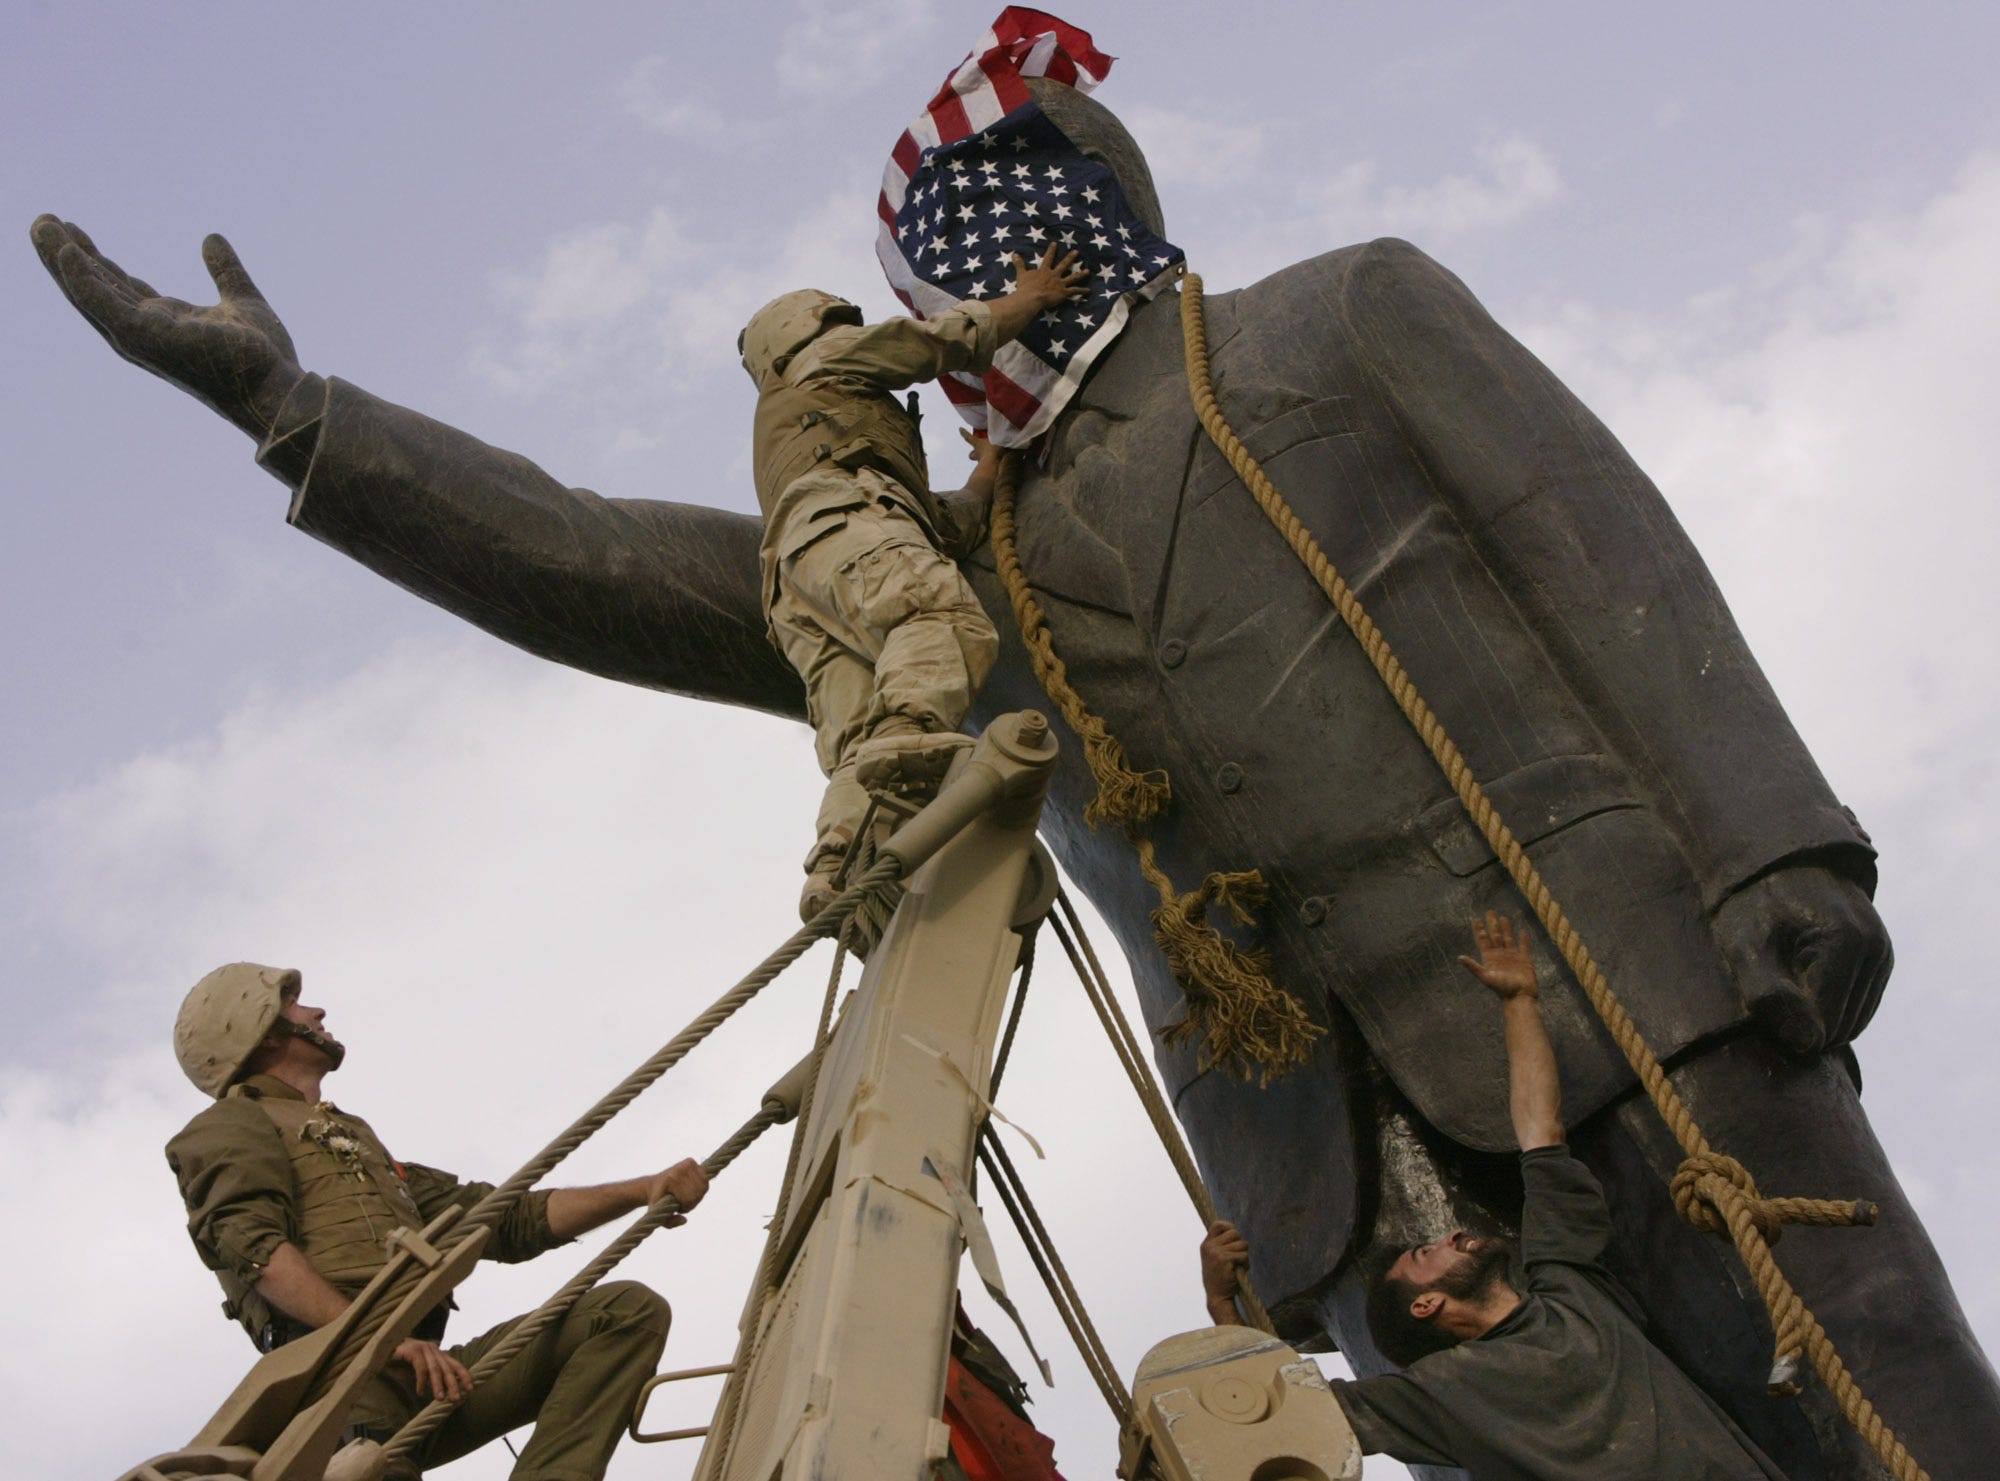 On the 20th anniversary of the U.S. invasion of Iraq, these photos tell the story of the war